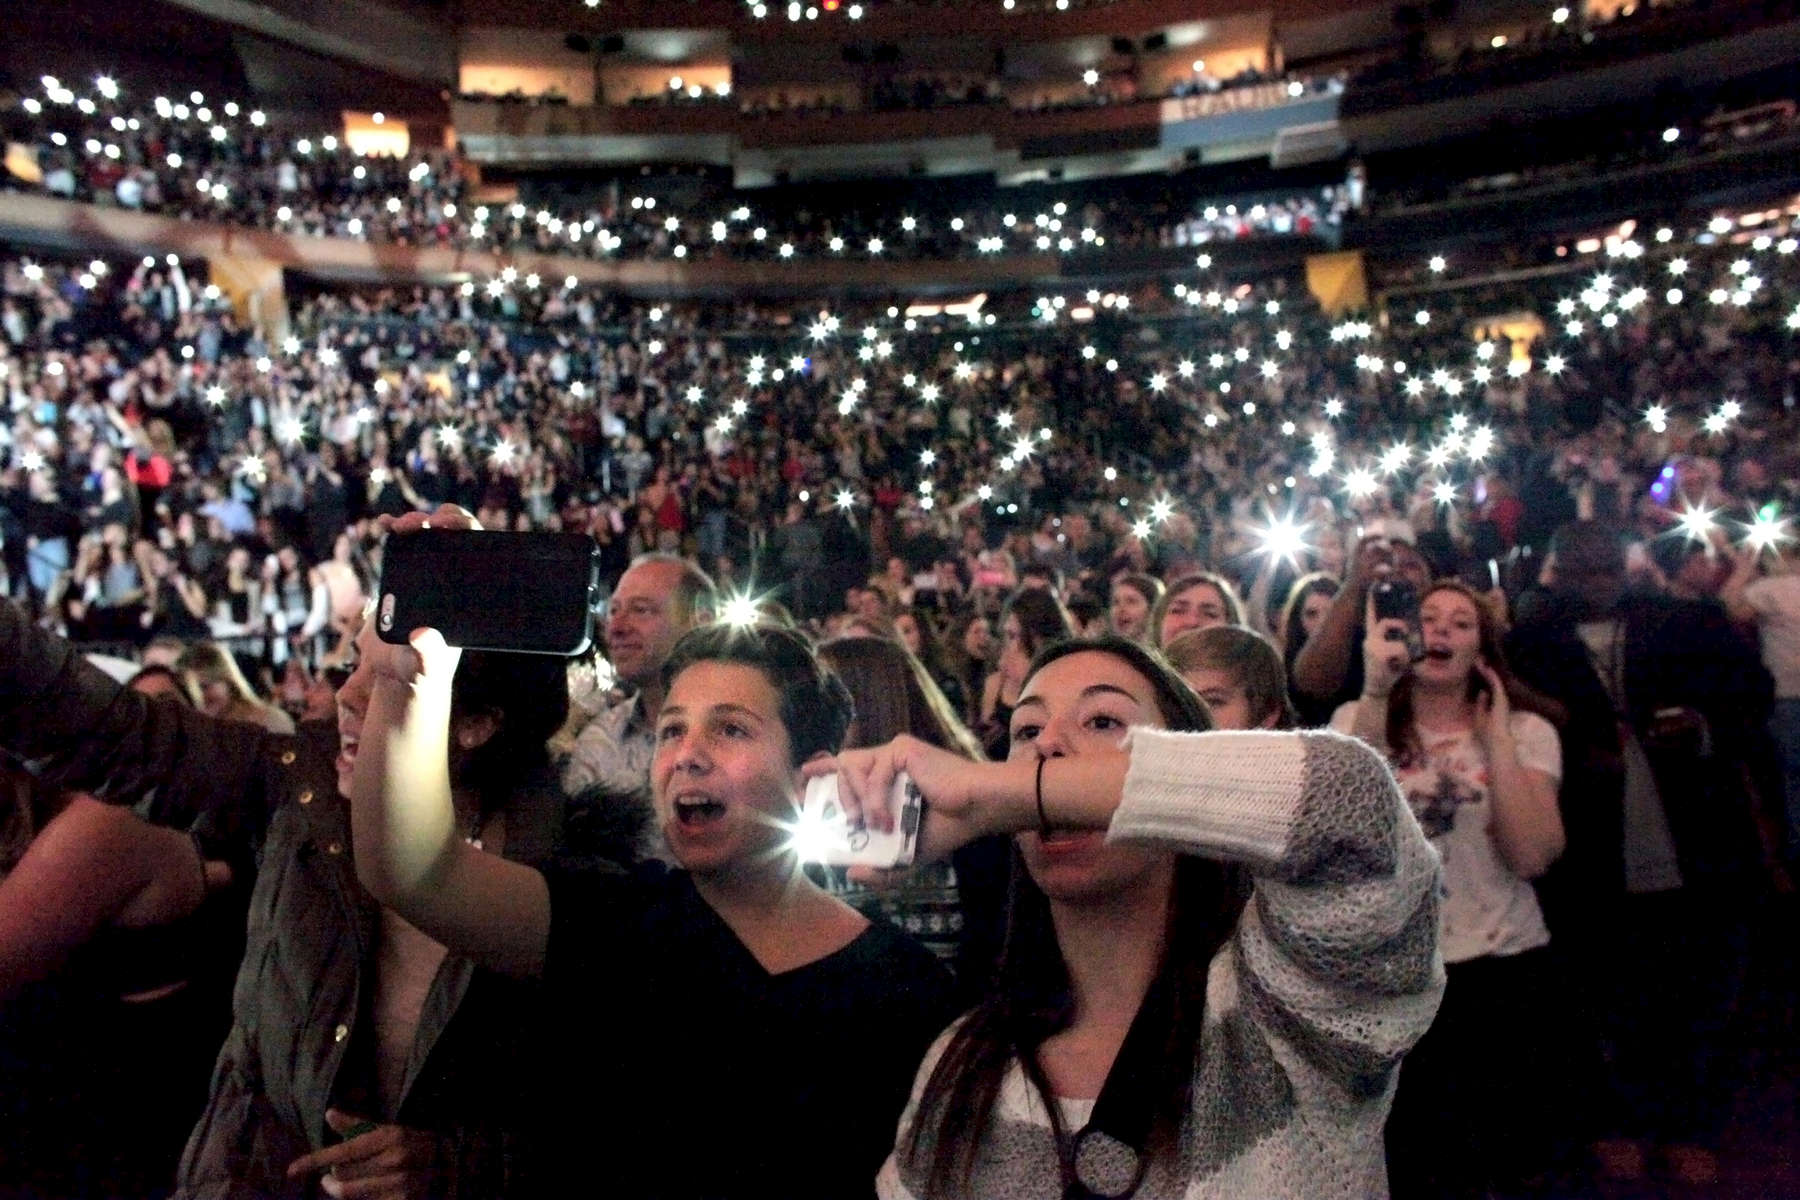 An audience lights up their cell phones instead of lighters, as Sam Smith performs during Jingle Ball at Madison Square Garden in Manhattan, New York on December 12, 2014. The crowd, much like the holiday performance, was energized and sparkling, festive under the glow of reindeer horns, glitter and of course, their cell phones. (For Rolling Stone)